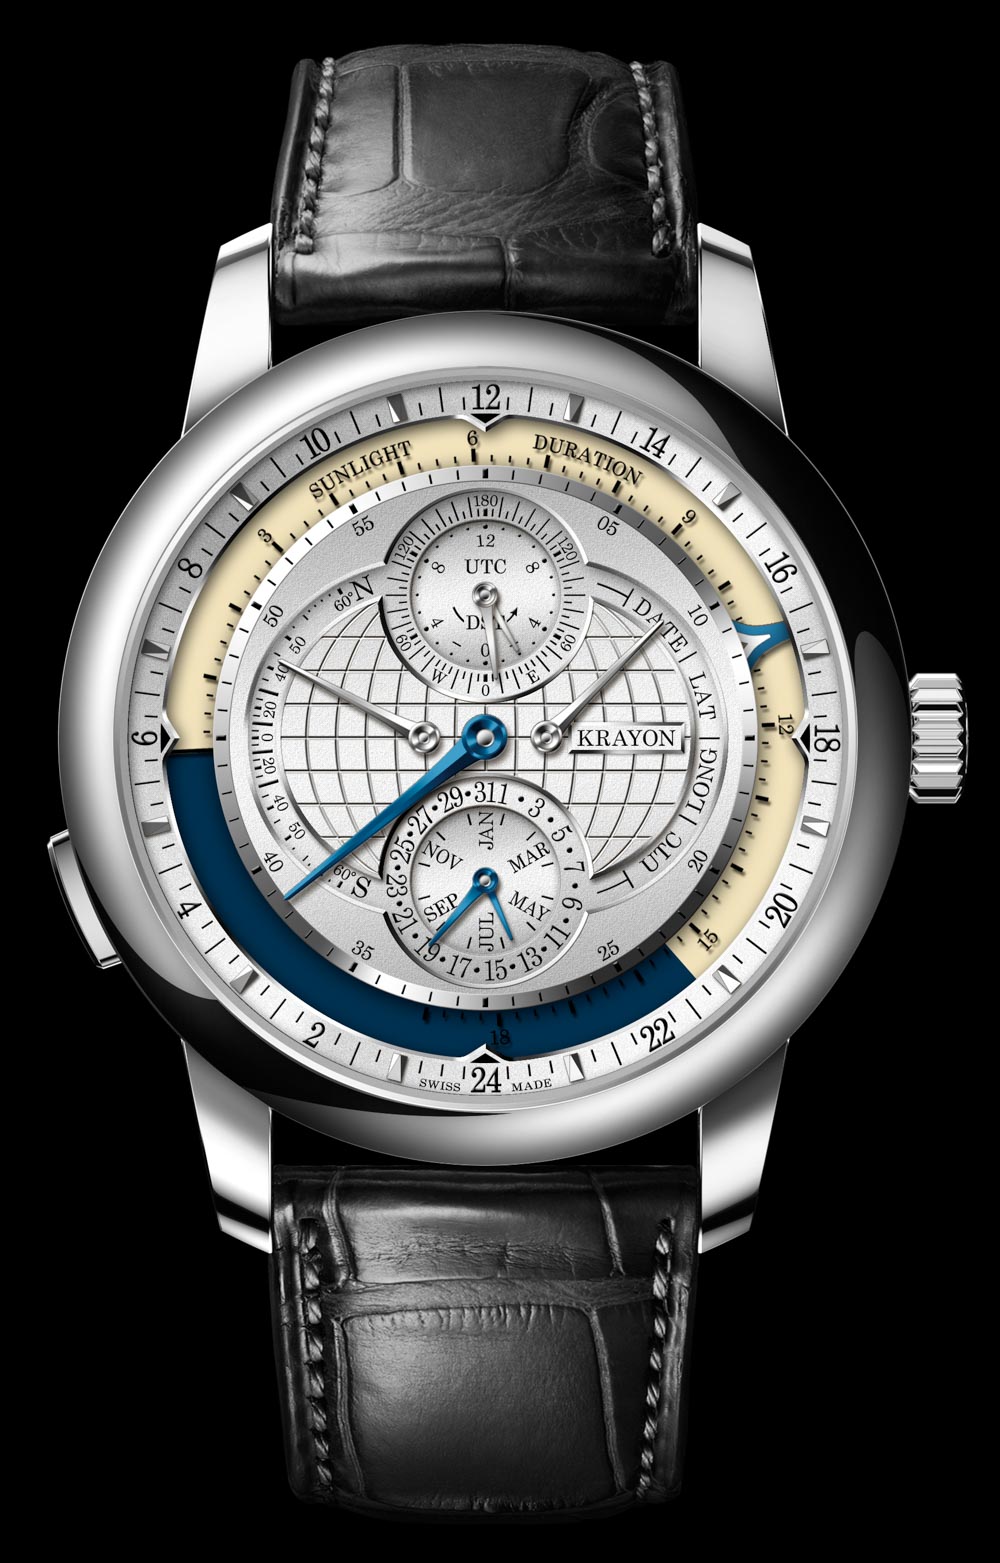 Krayon Everywhere Introduces Sunrise & Sunset Times In A Mechanical Watch Watch Releases 